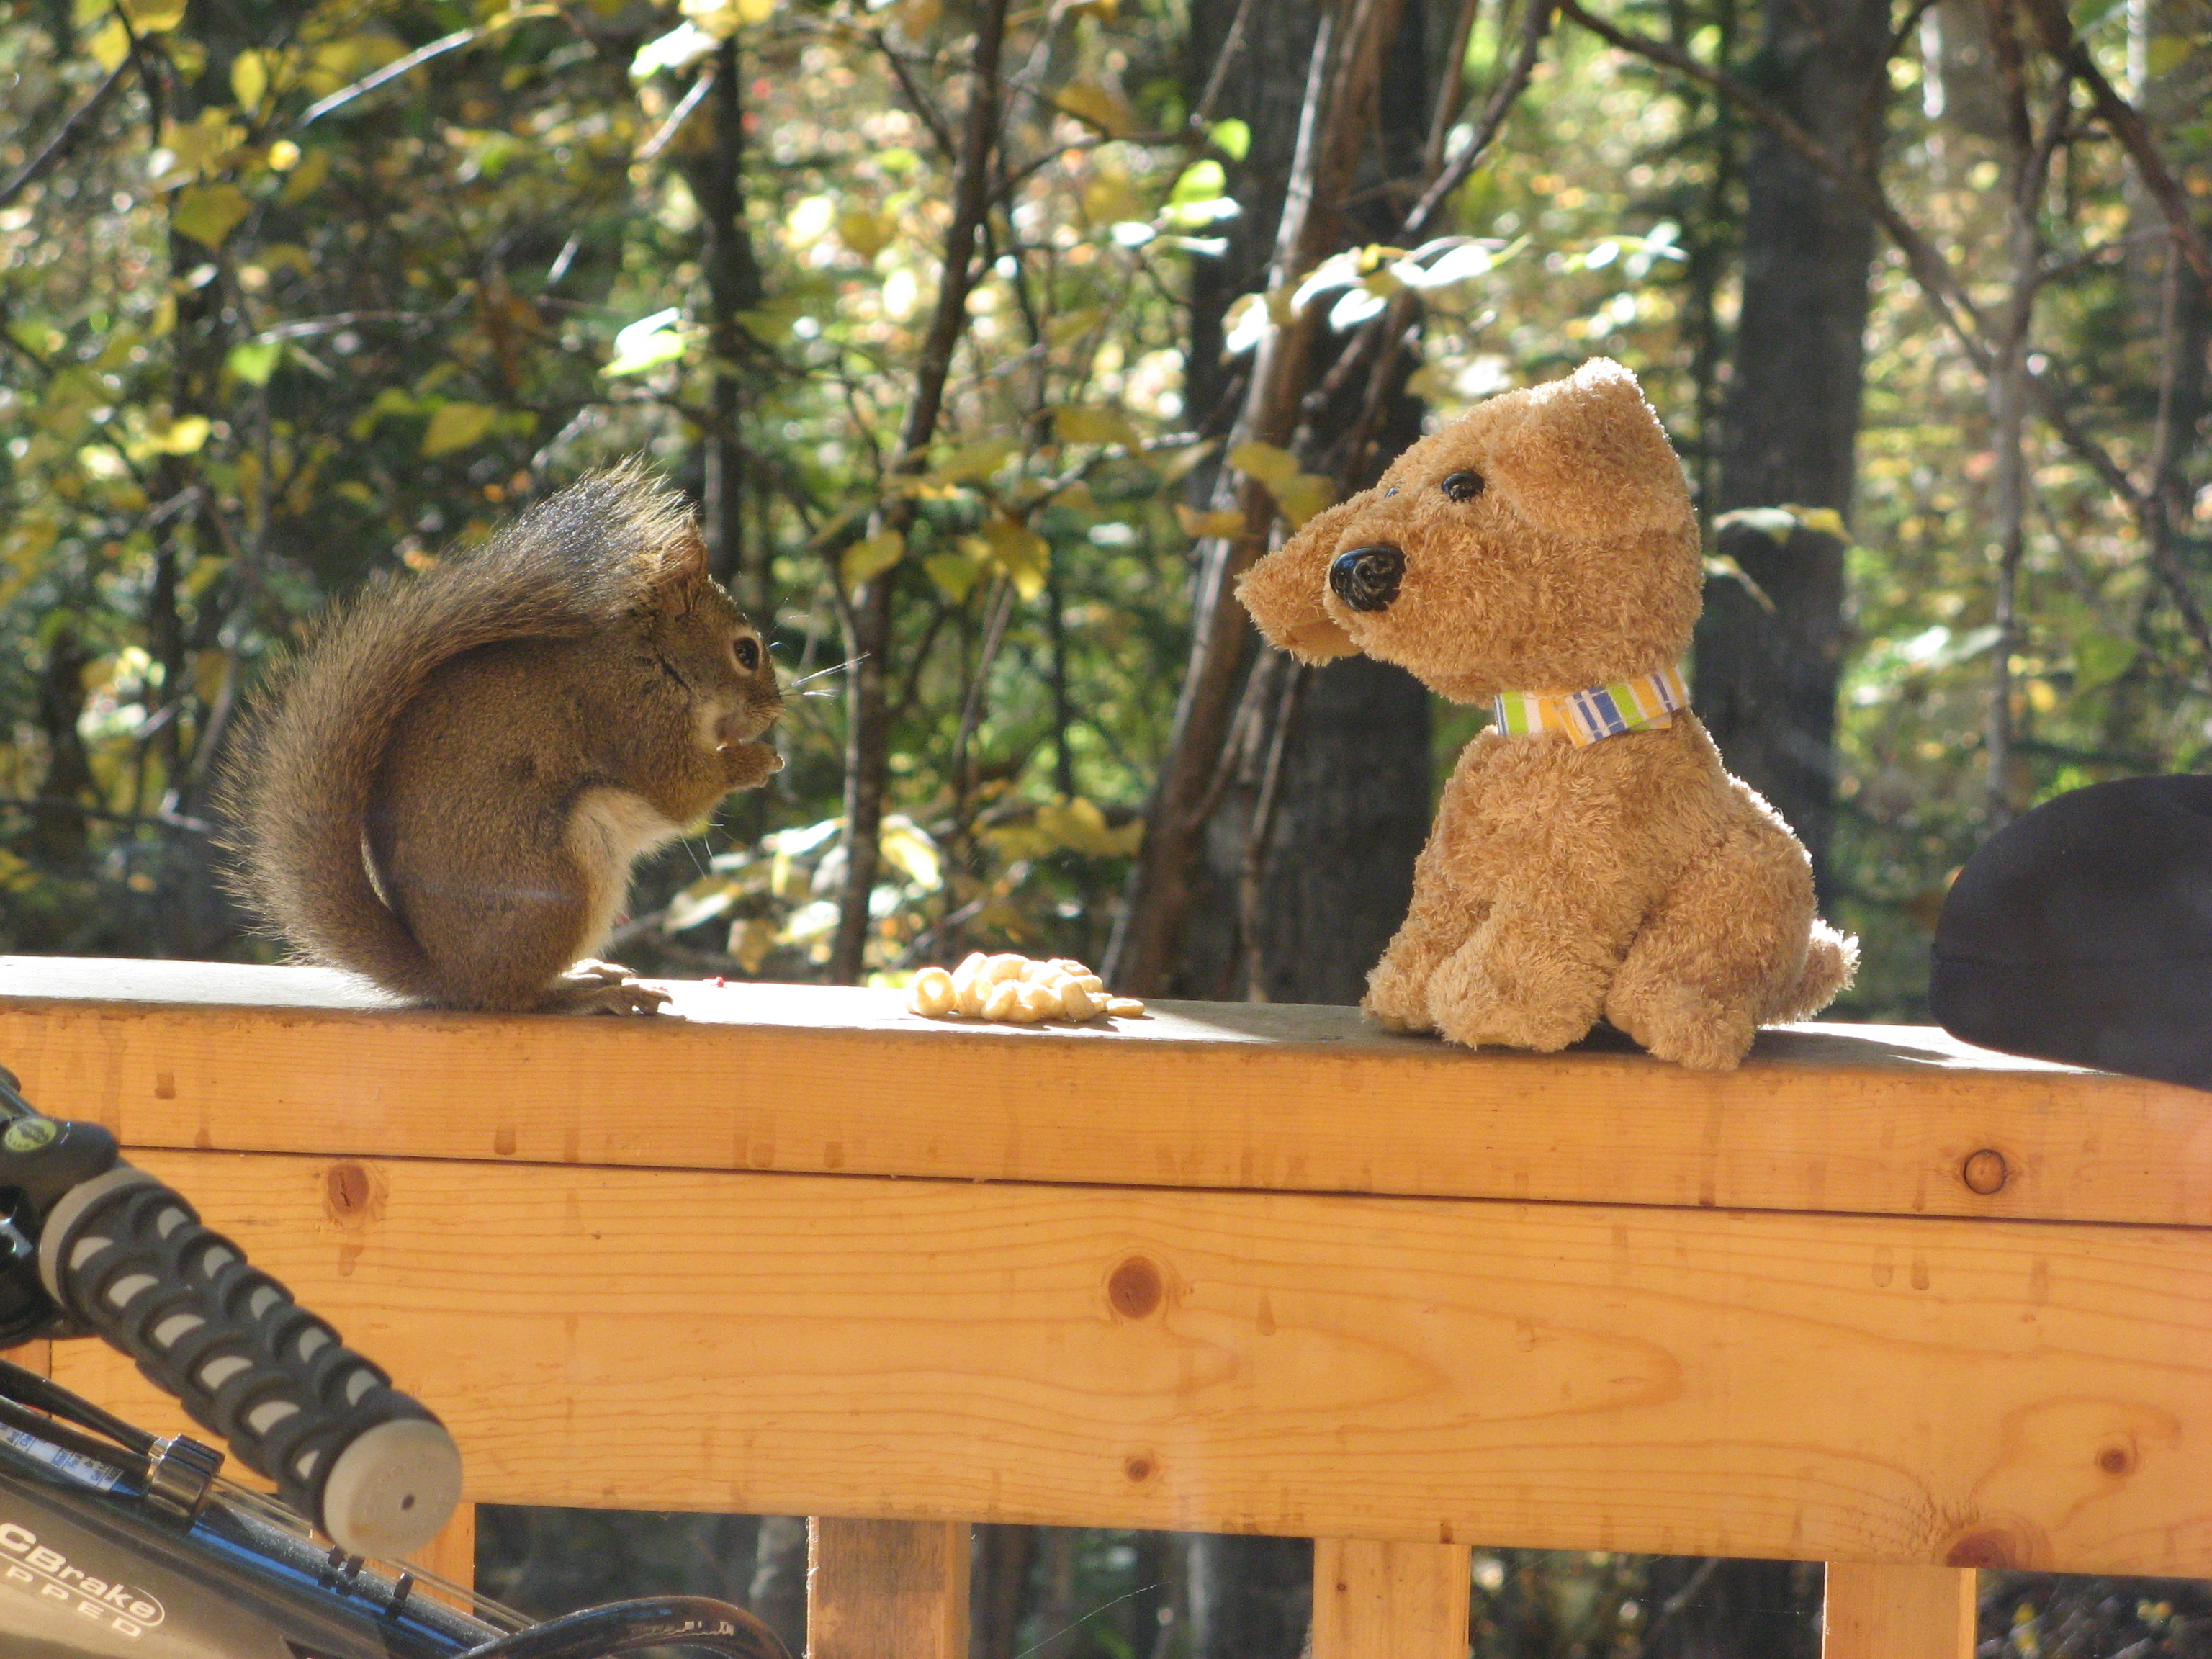 Talkeetna - A cabin, a man, a squirrel, and a stuffed animal.